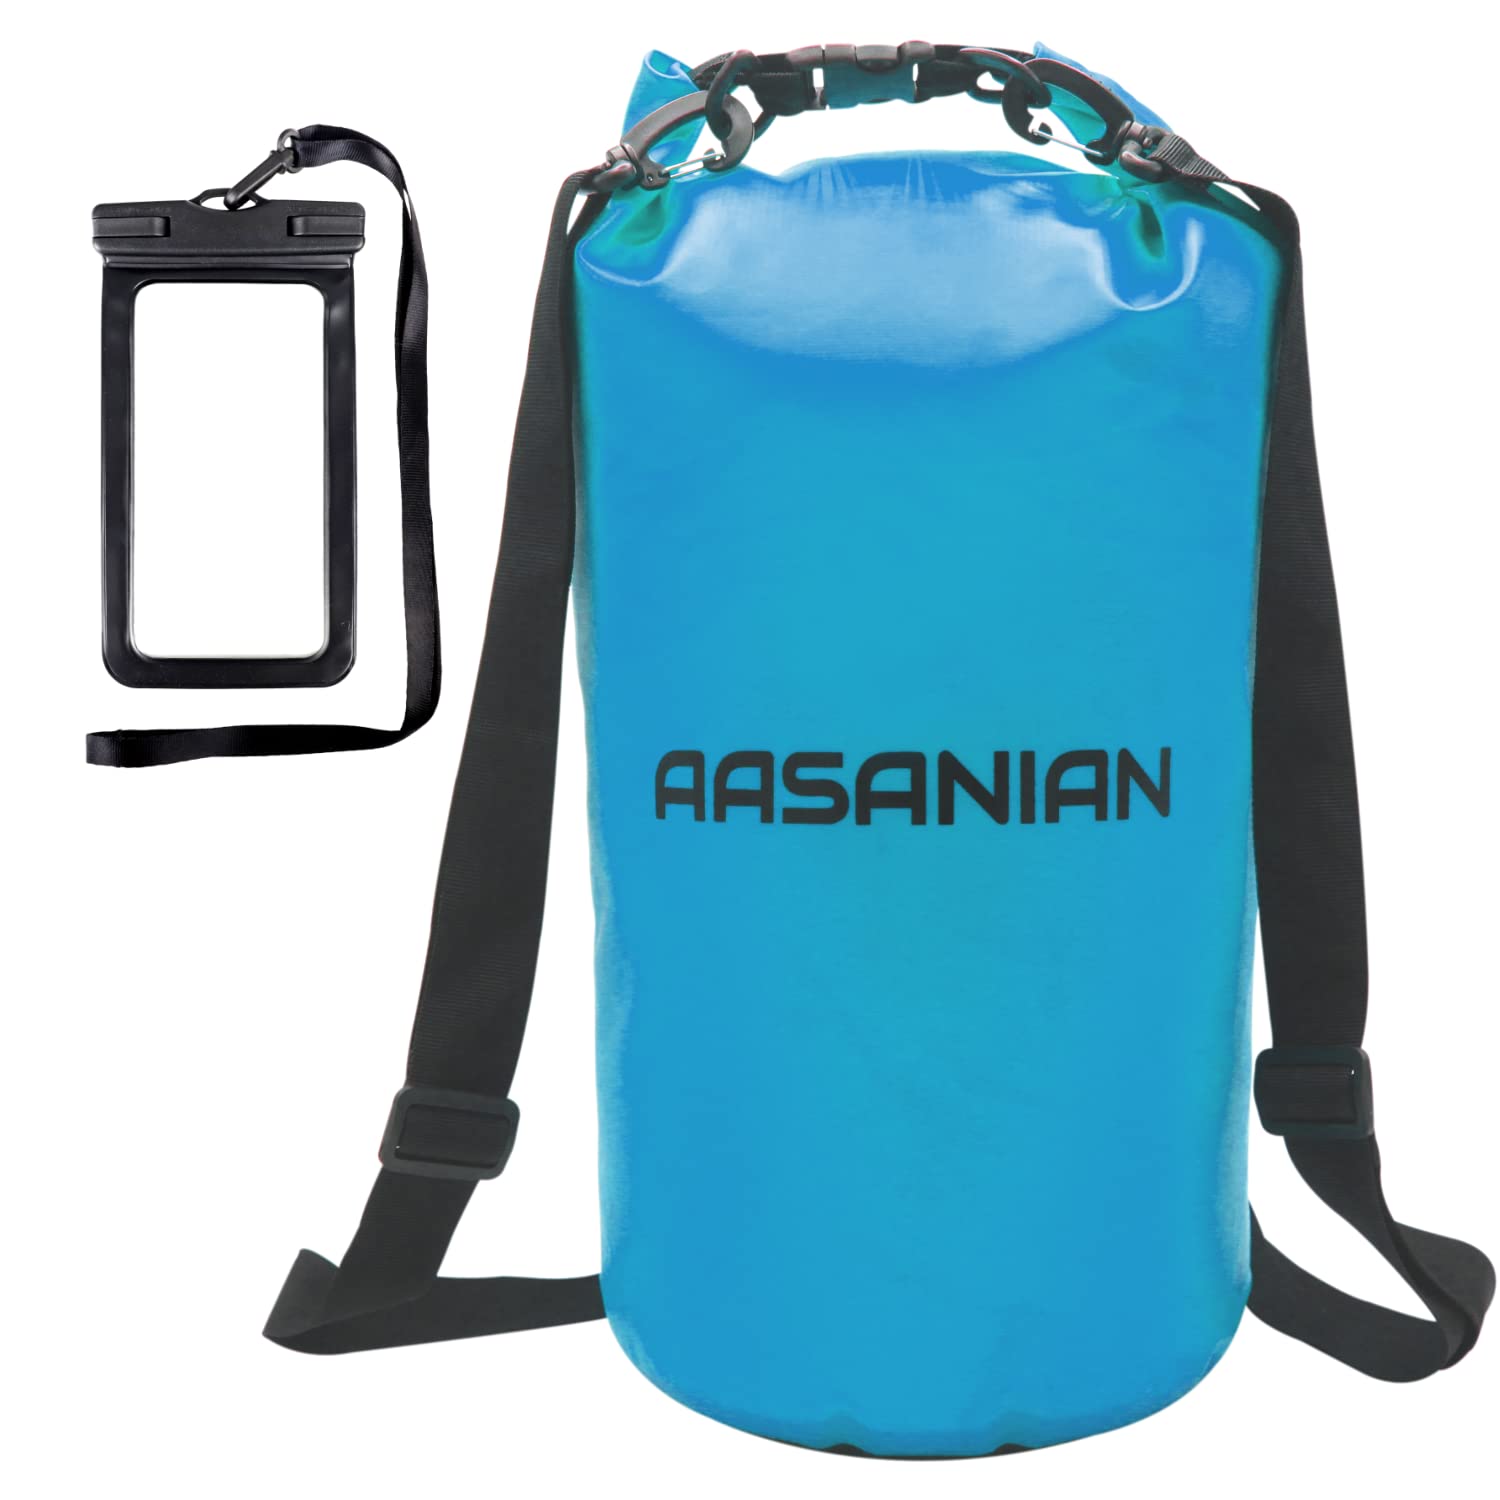 AASANIAN Dry Bag - 10L Dry Bags Waterproof for Kayak and Paddle Board Enthusiasts - Backpack with Extra Shoulder Strap, Two PVC Zipper Pockets, Heavy-Duty Metal Clips & Phone Case (Light Blue)